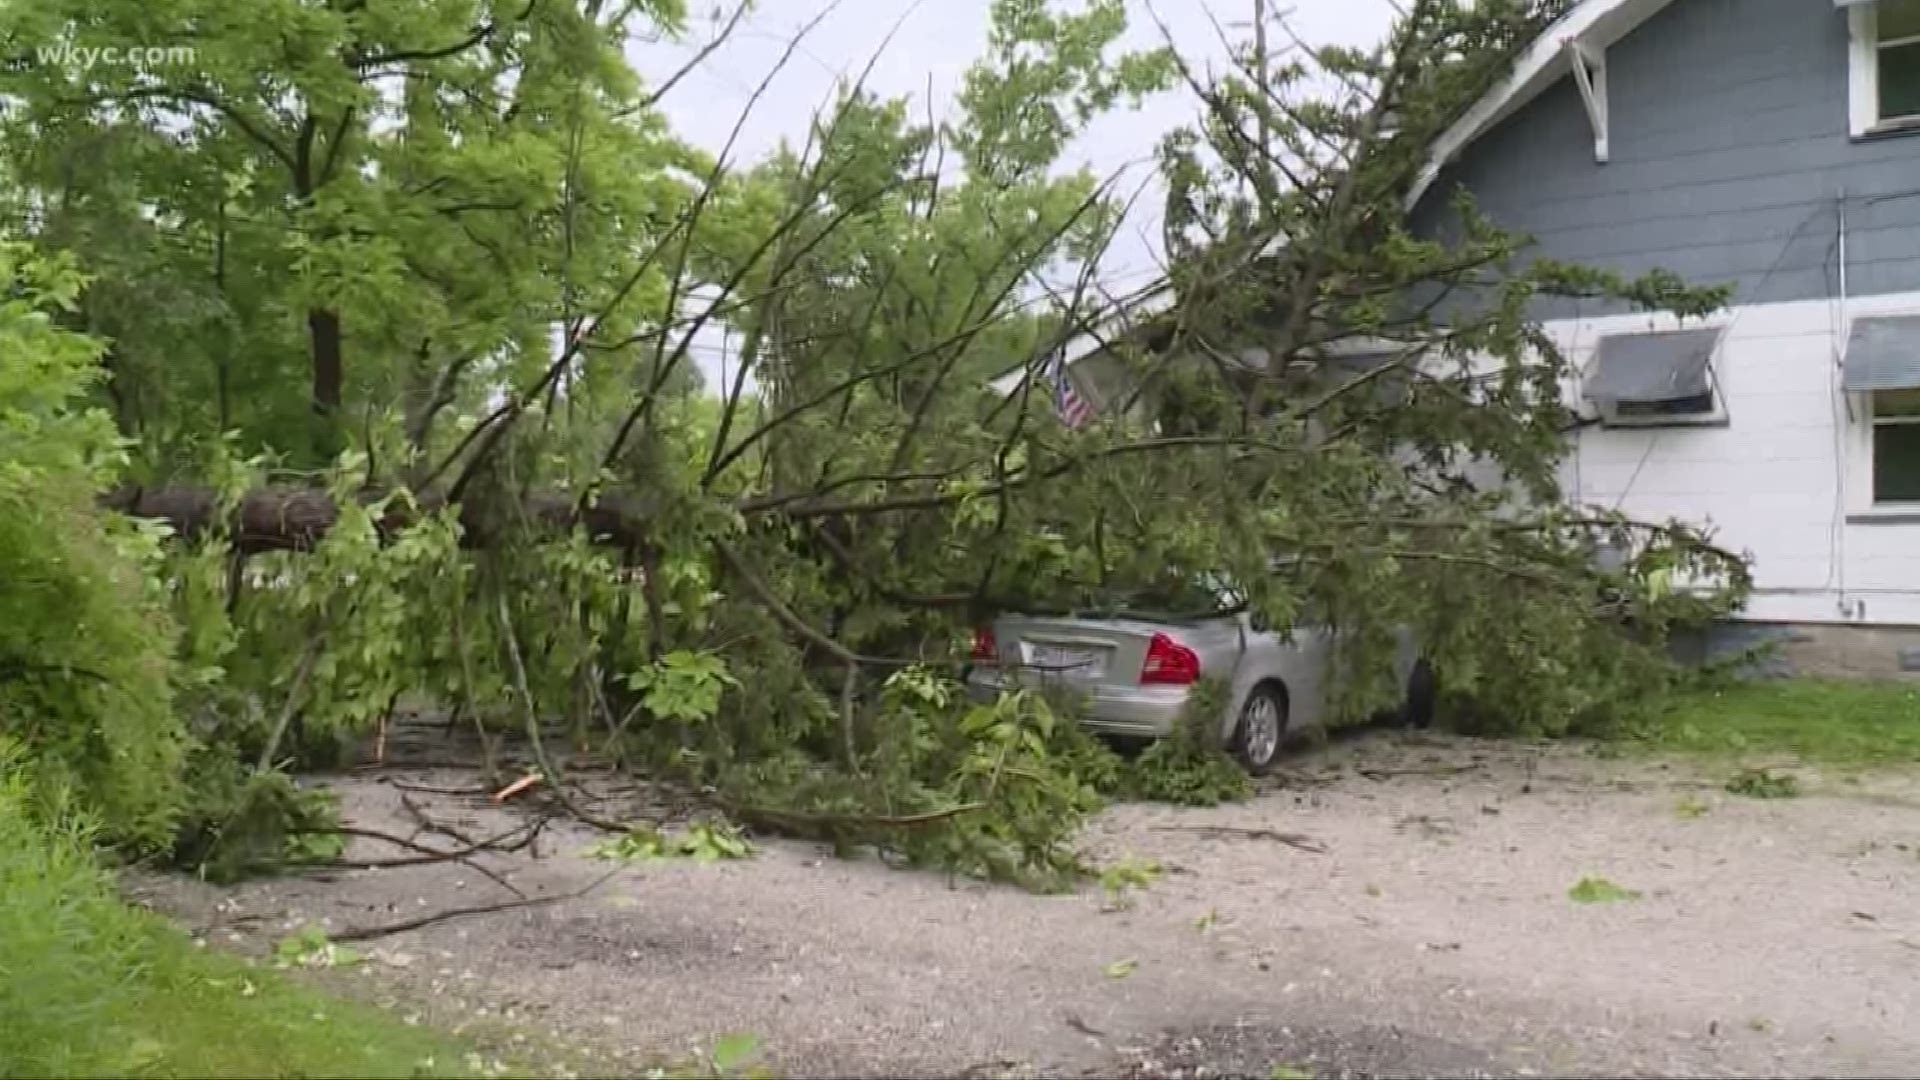 NWS confirm EF1 tornado in Oakwood and Glenwillow in Cuyahoga County